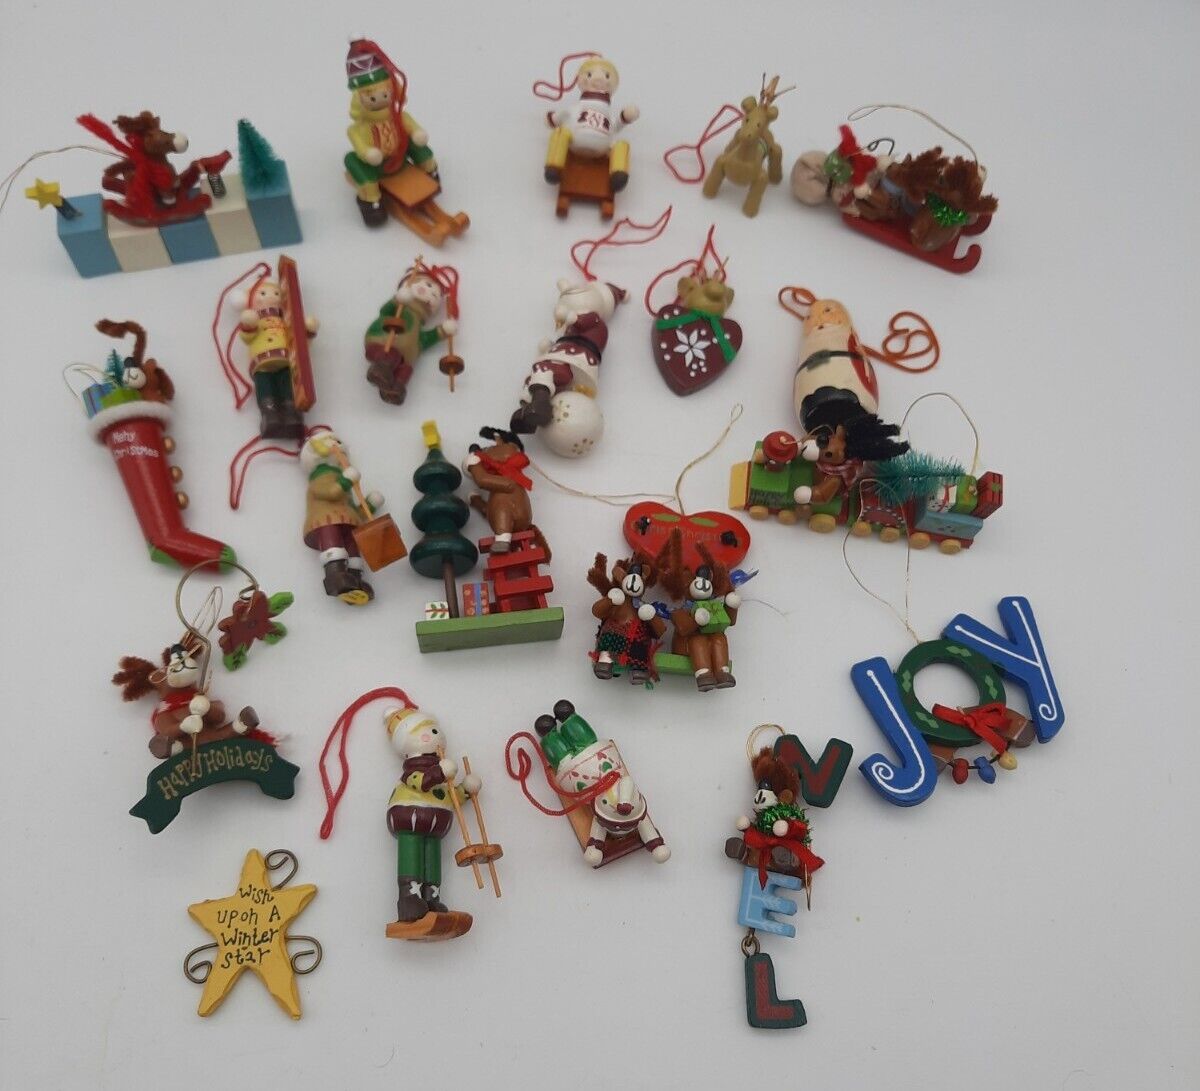 Vintage Miniature Wooden Christmas Tree Ornaments Hand Painted  1-3” Lot of 21